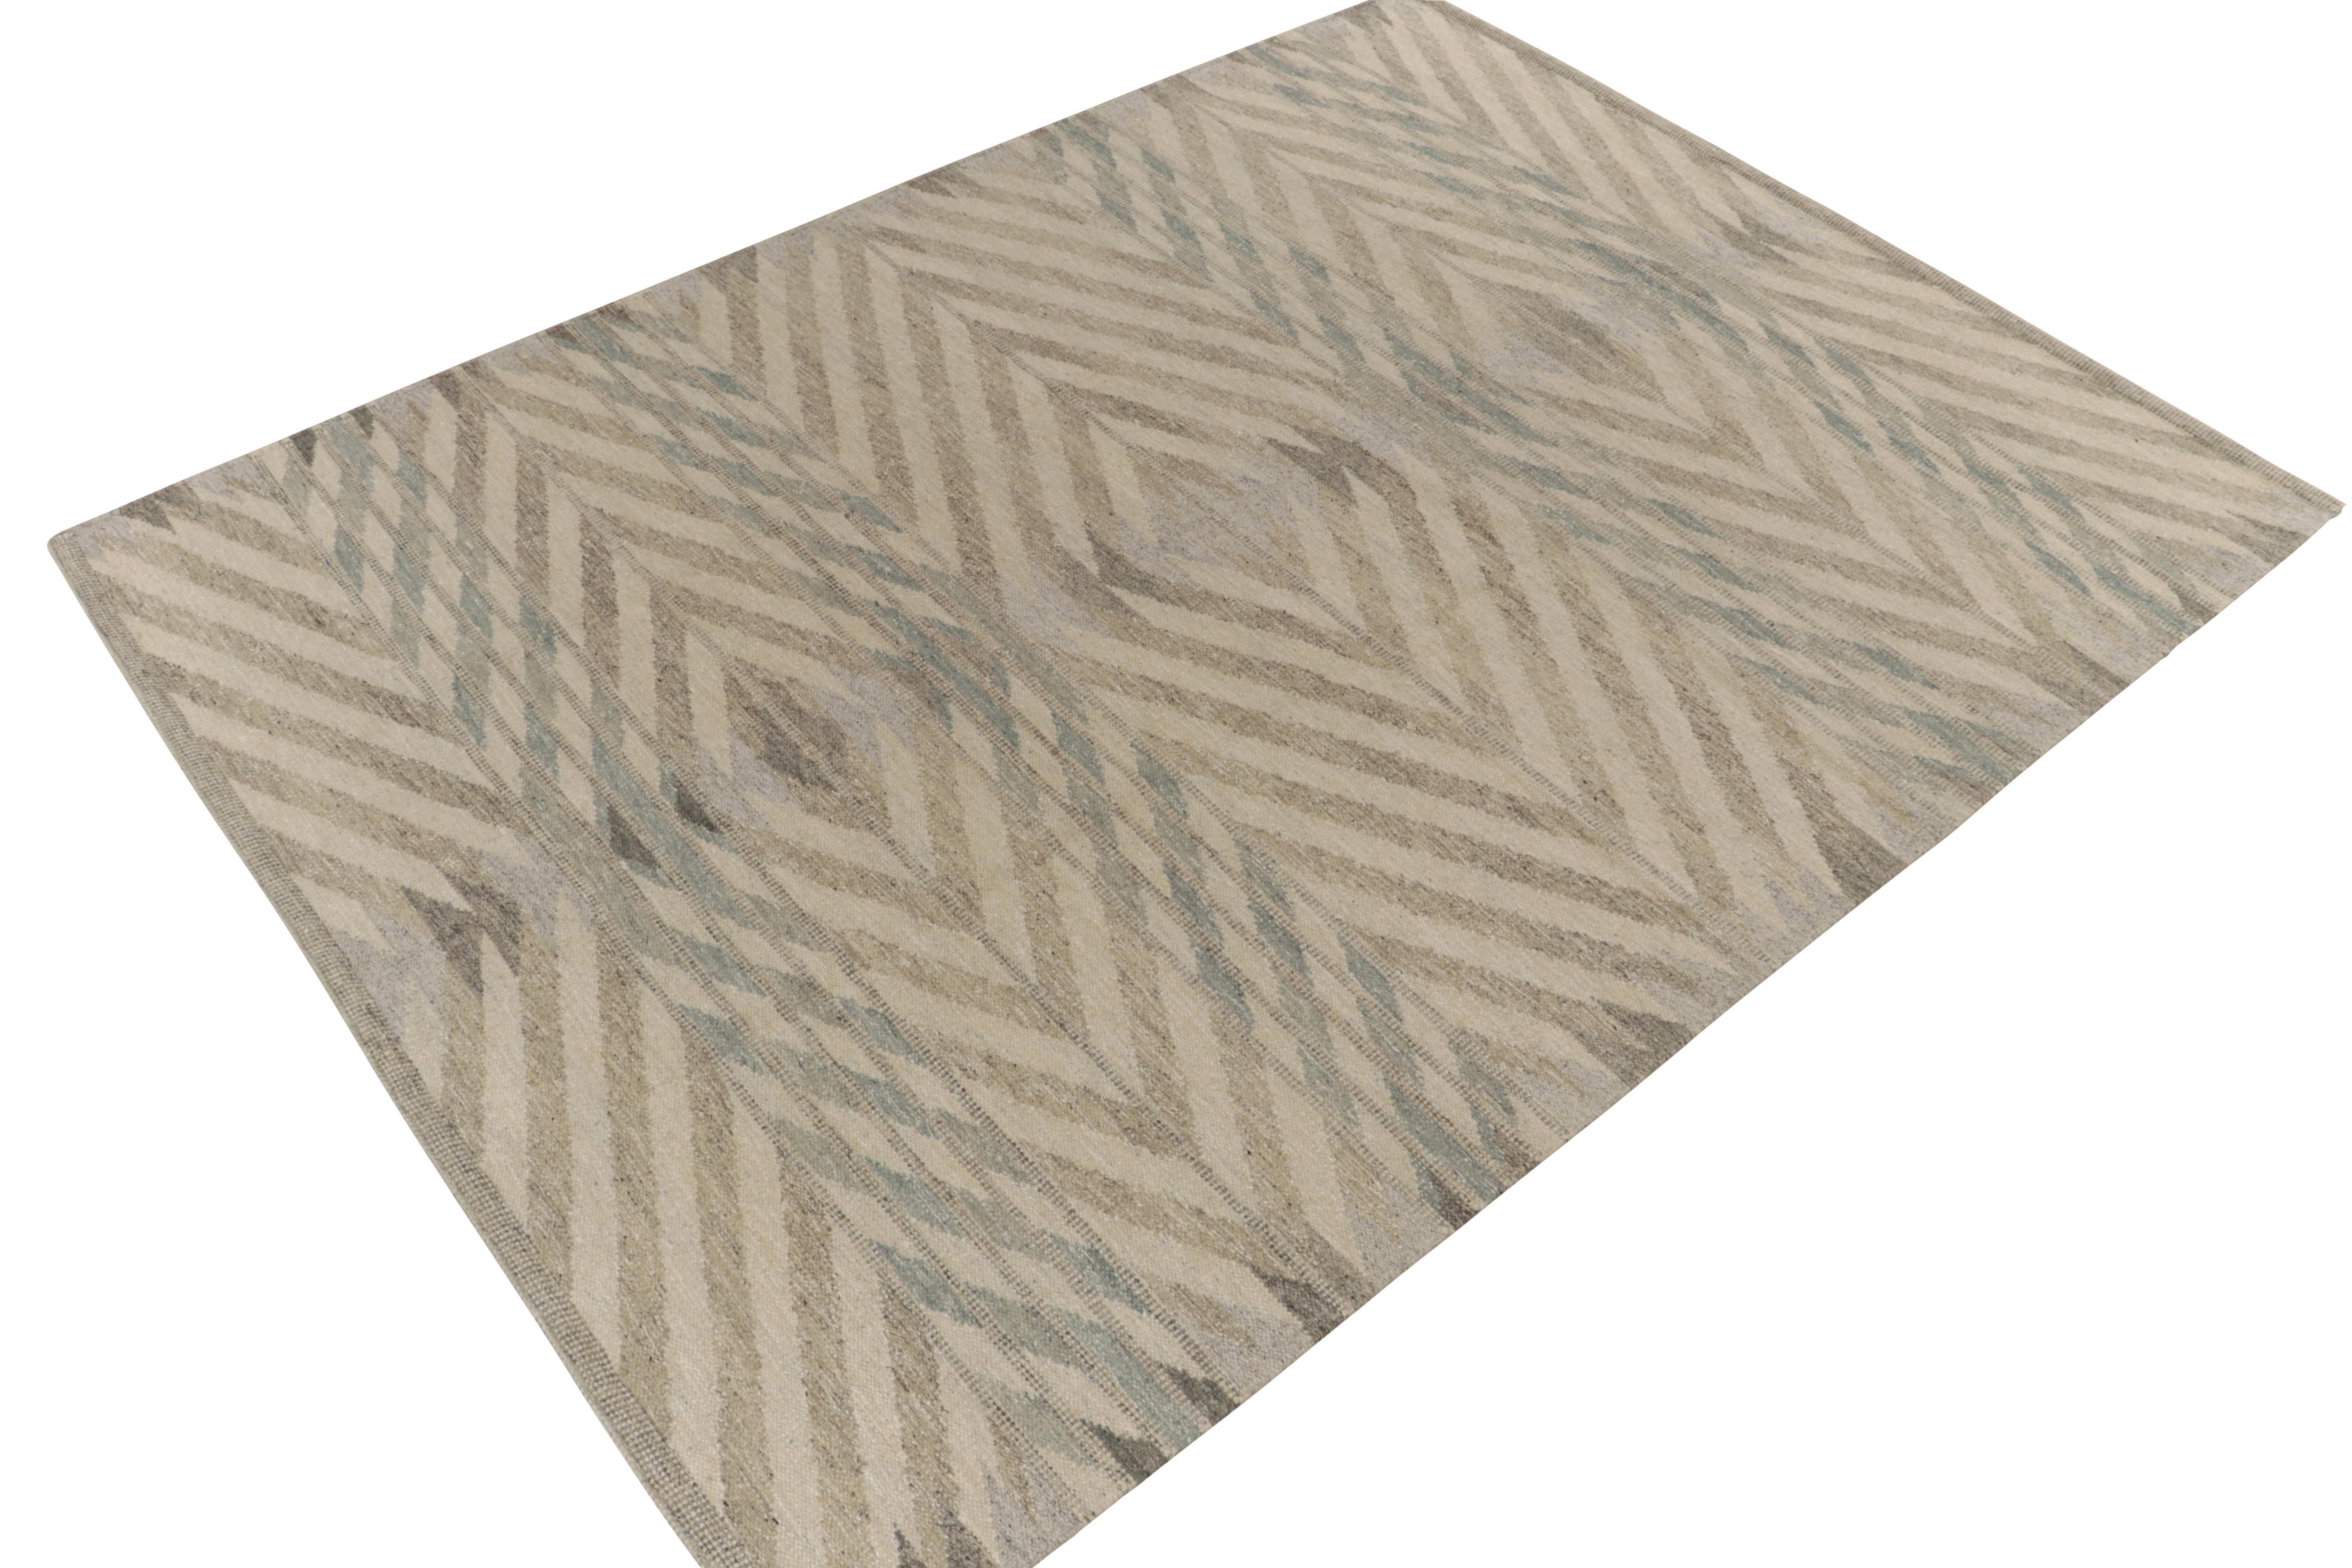 Indian Rug & Kilim’s Scandinavian Style Kilim in Beige-Brown and Blue Chevrons For Sale